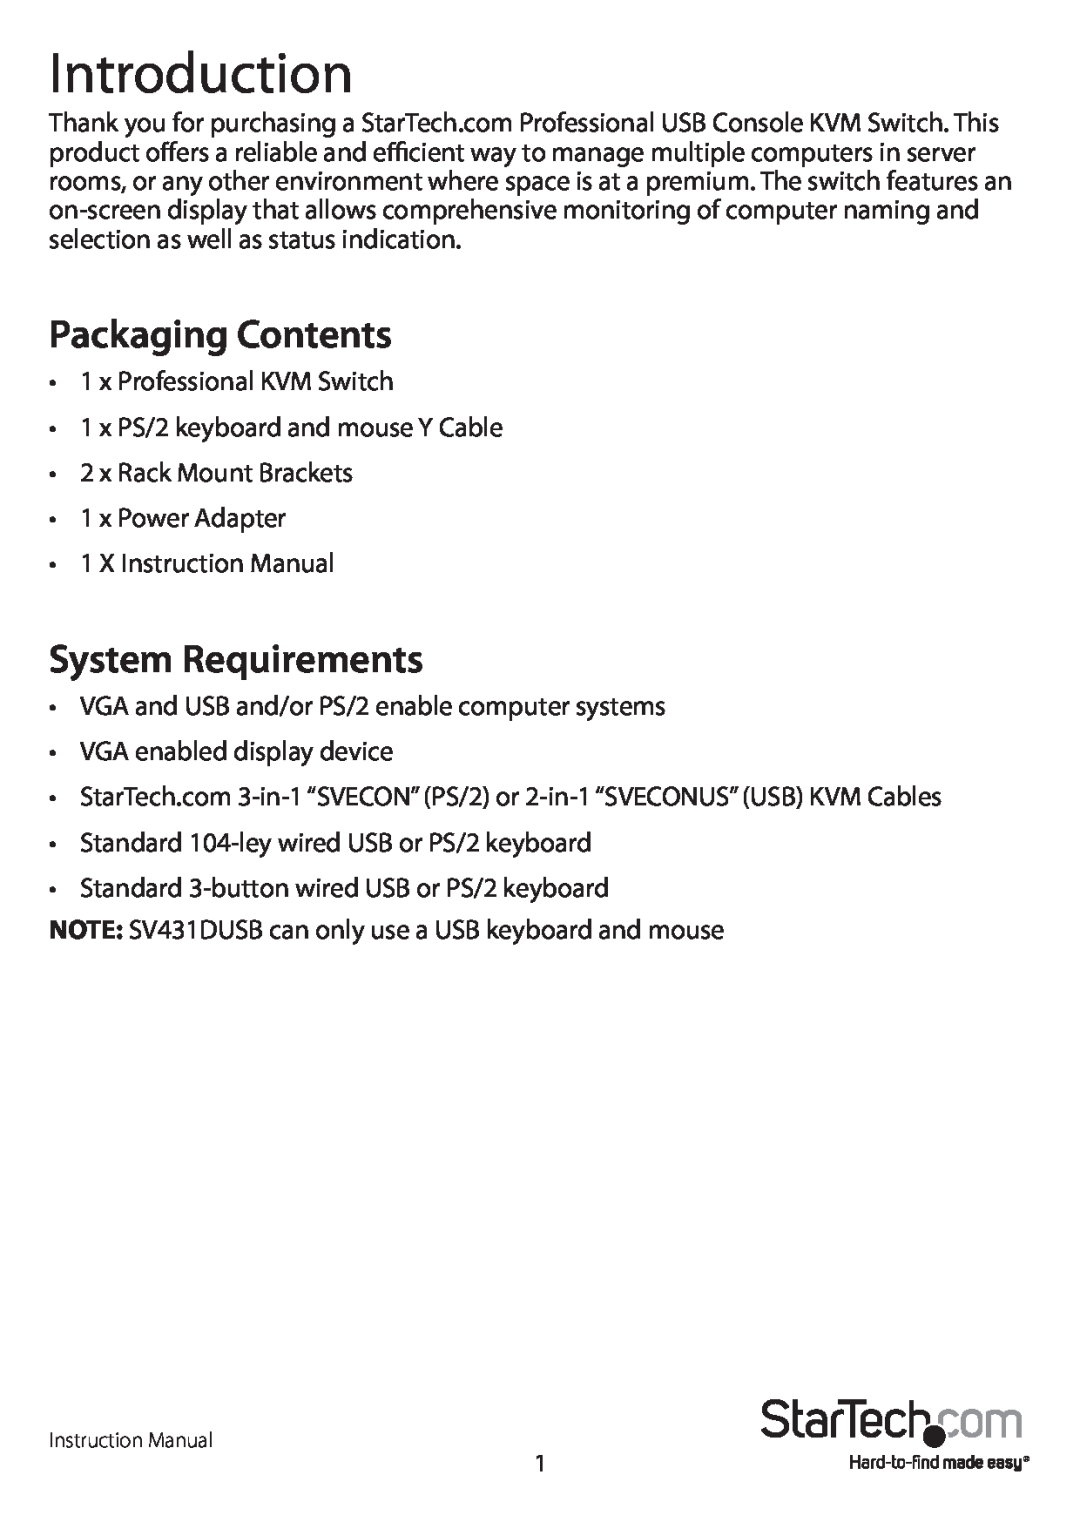 StarTech.com sv431dusb manual Introduction, Packaging Contents, System Requirements 